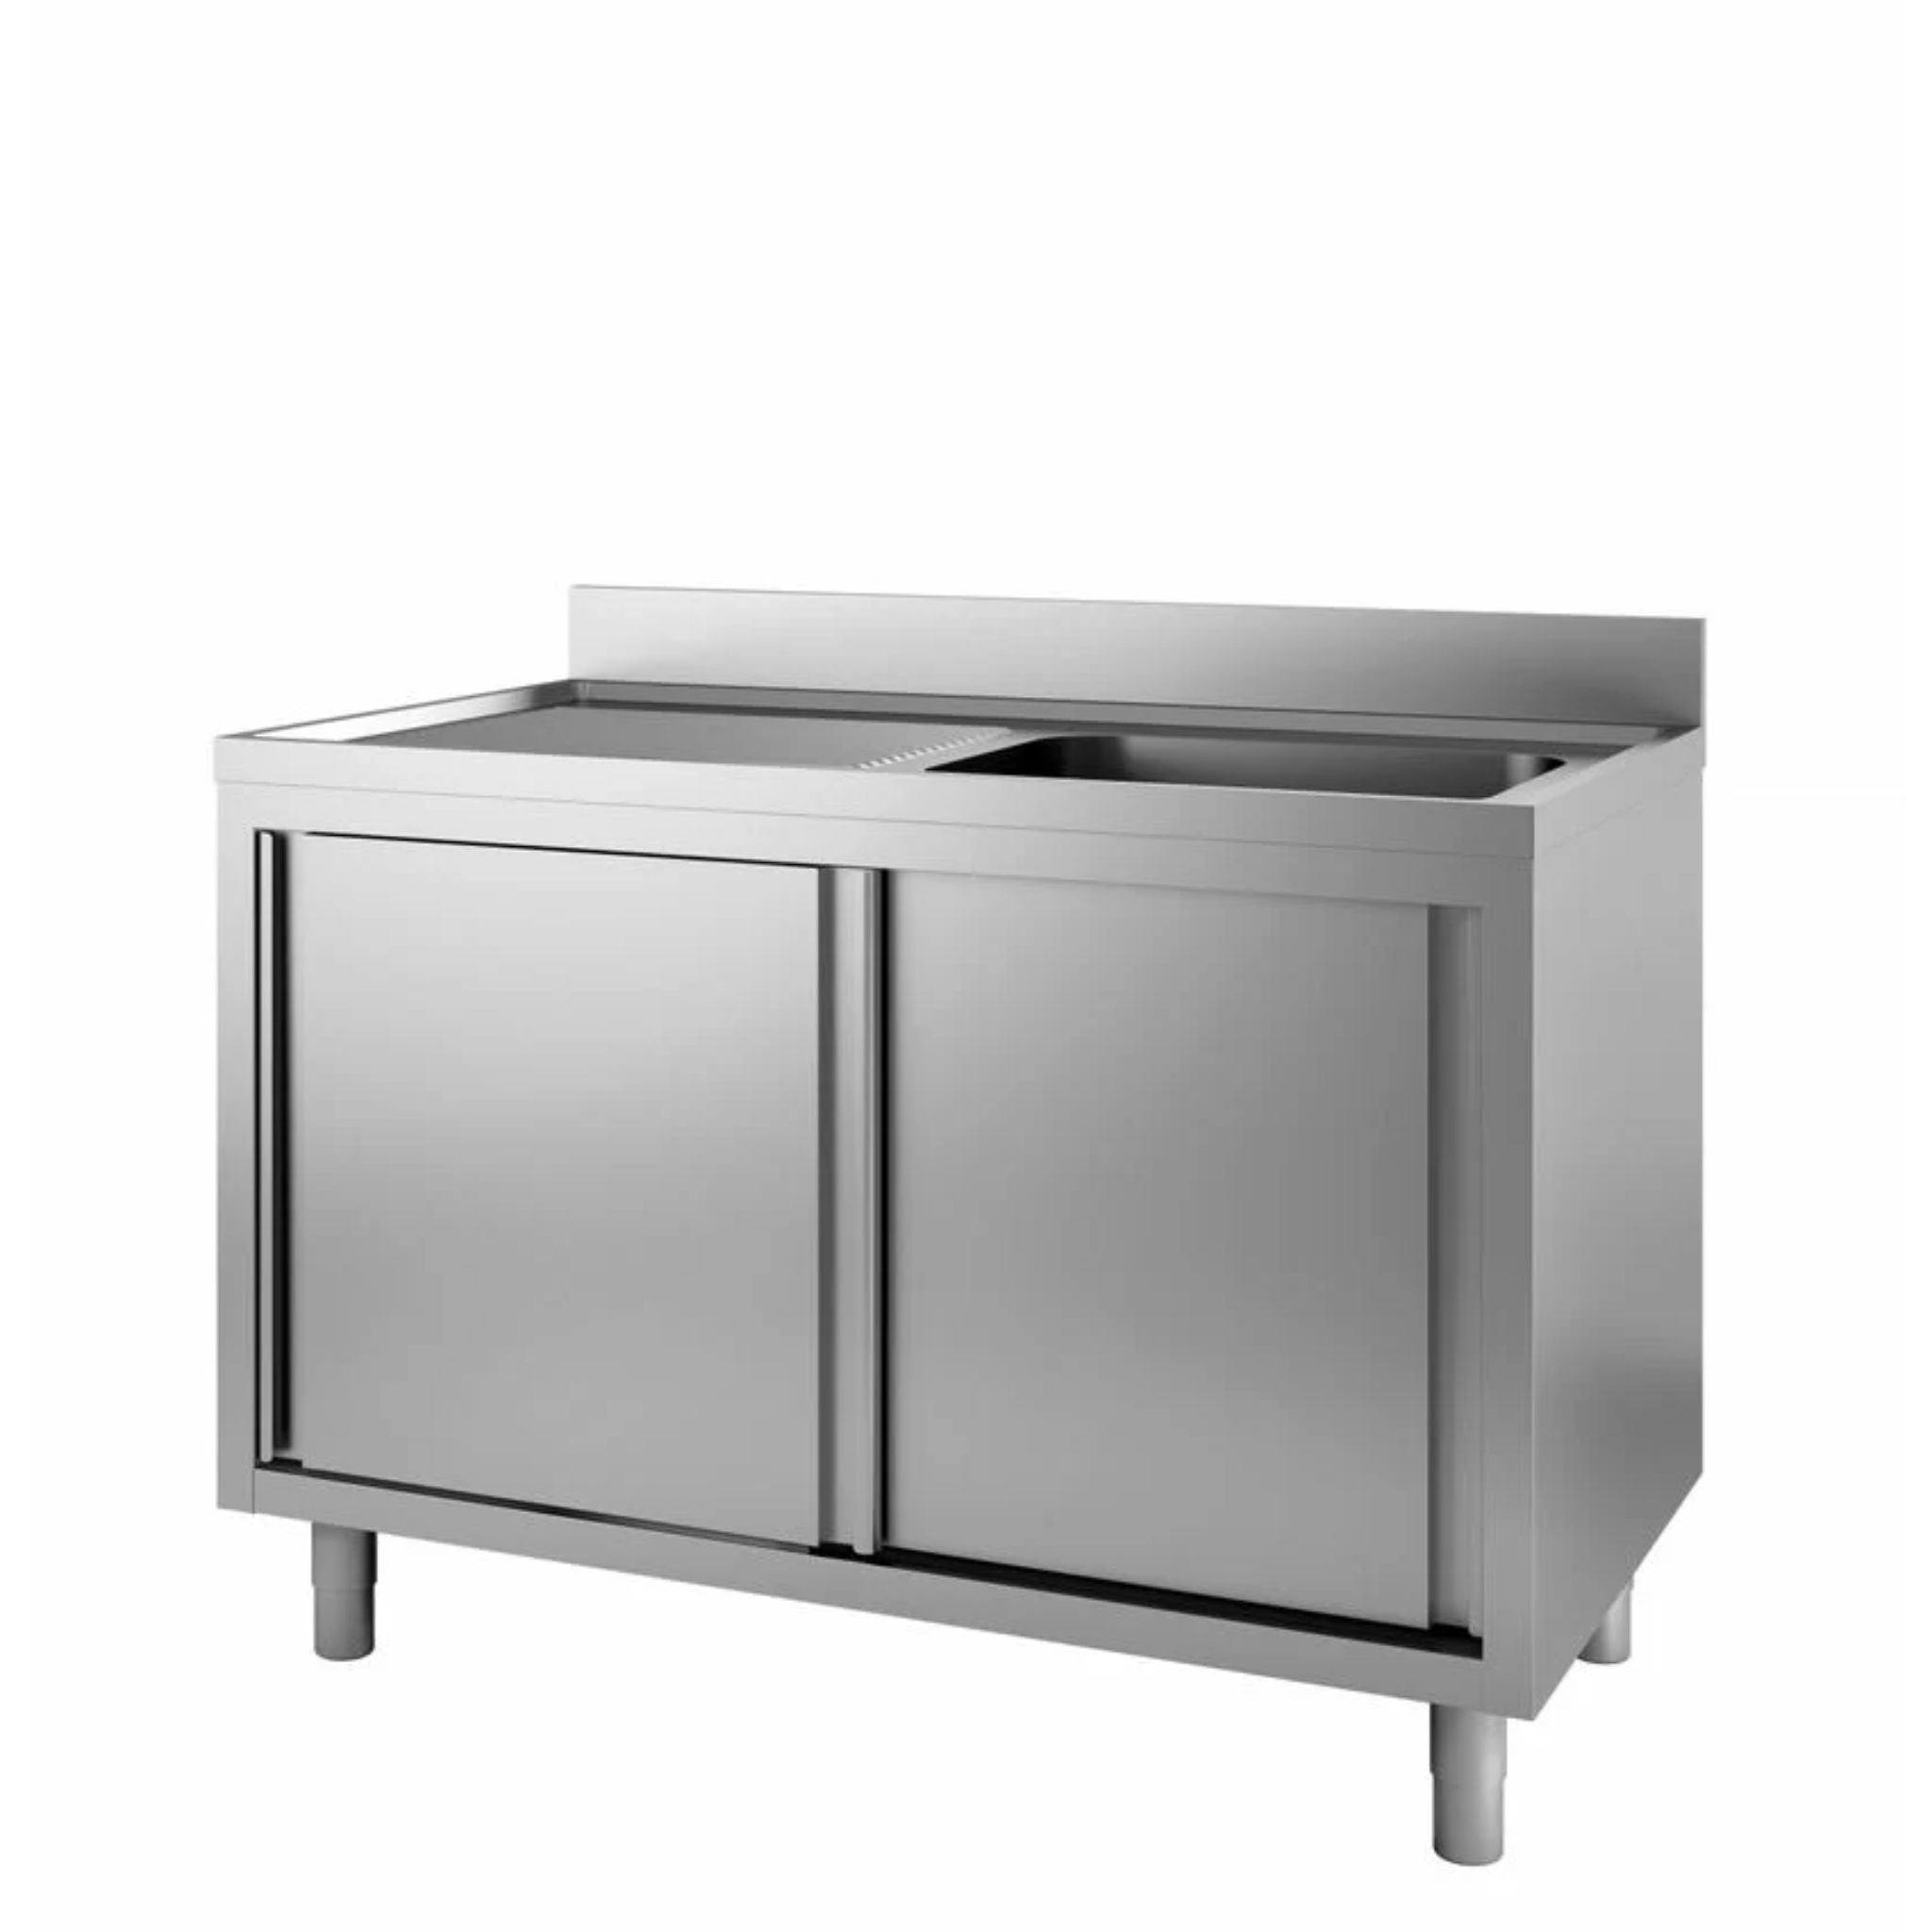 Stainless steel sink unit with basin right standard